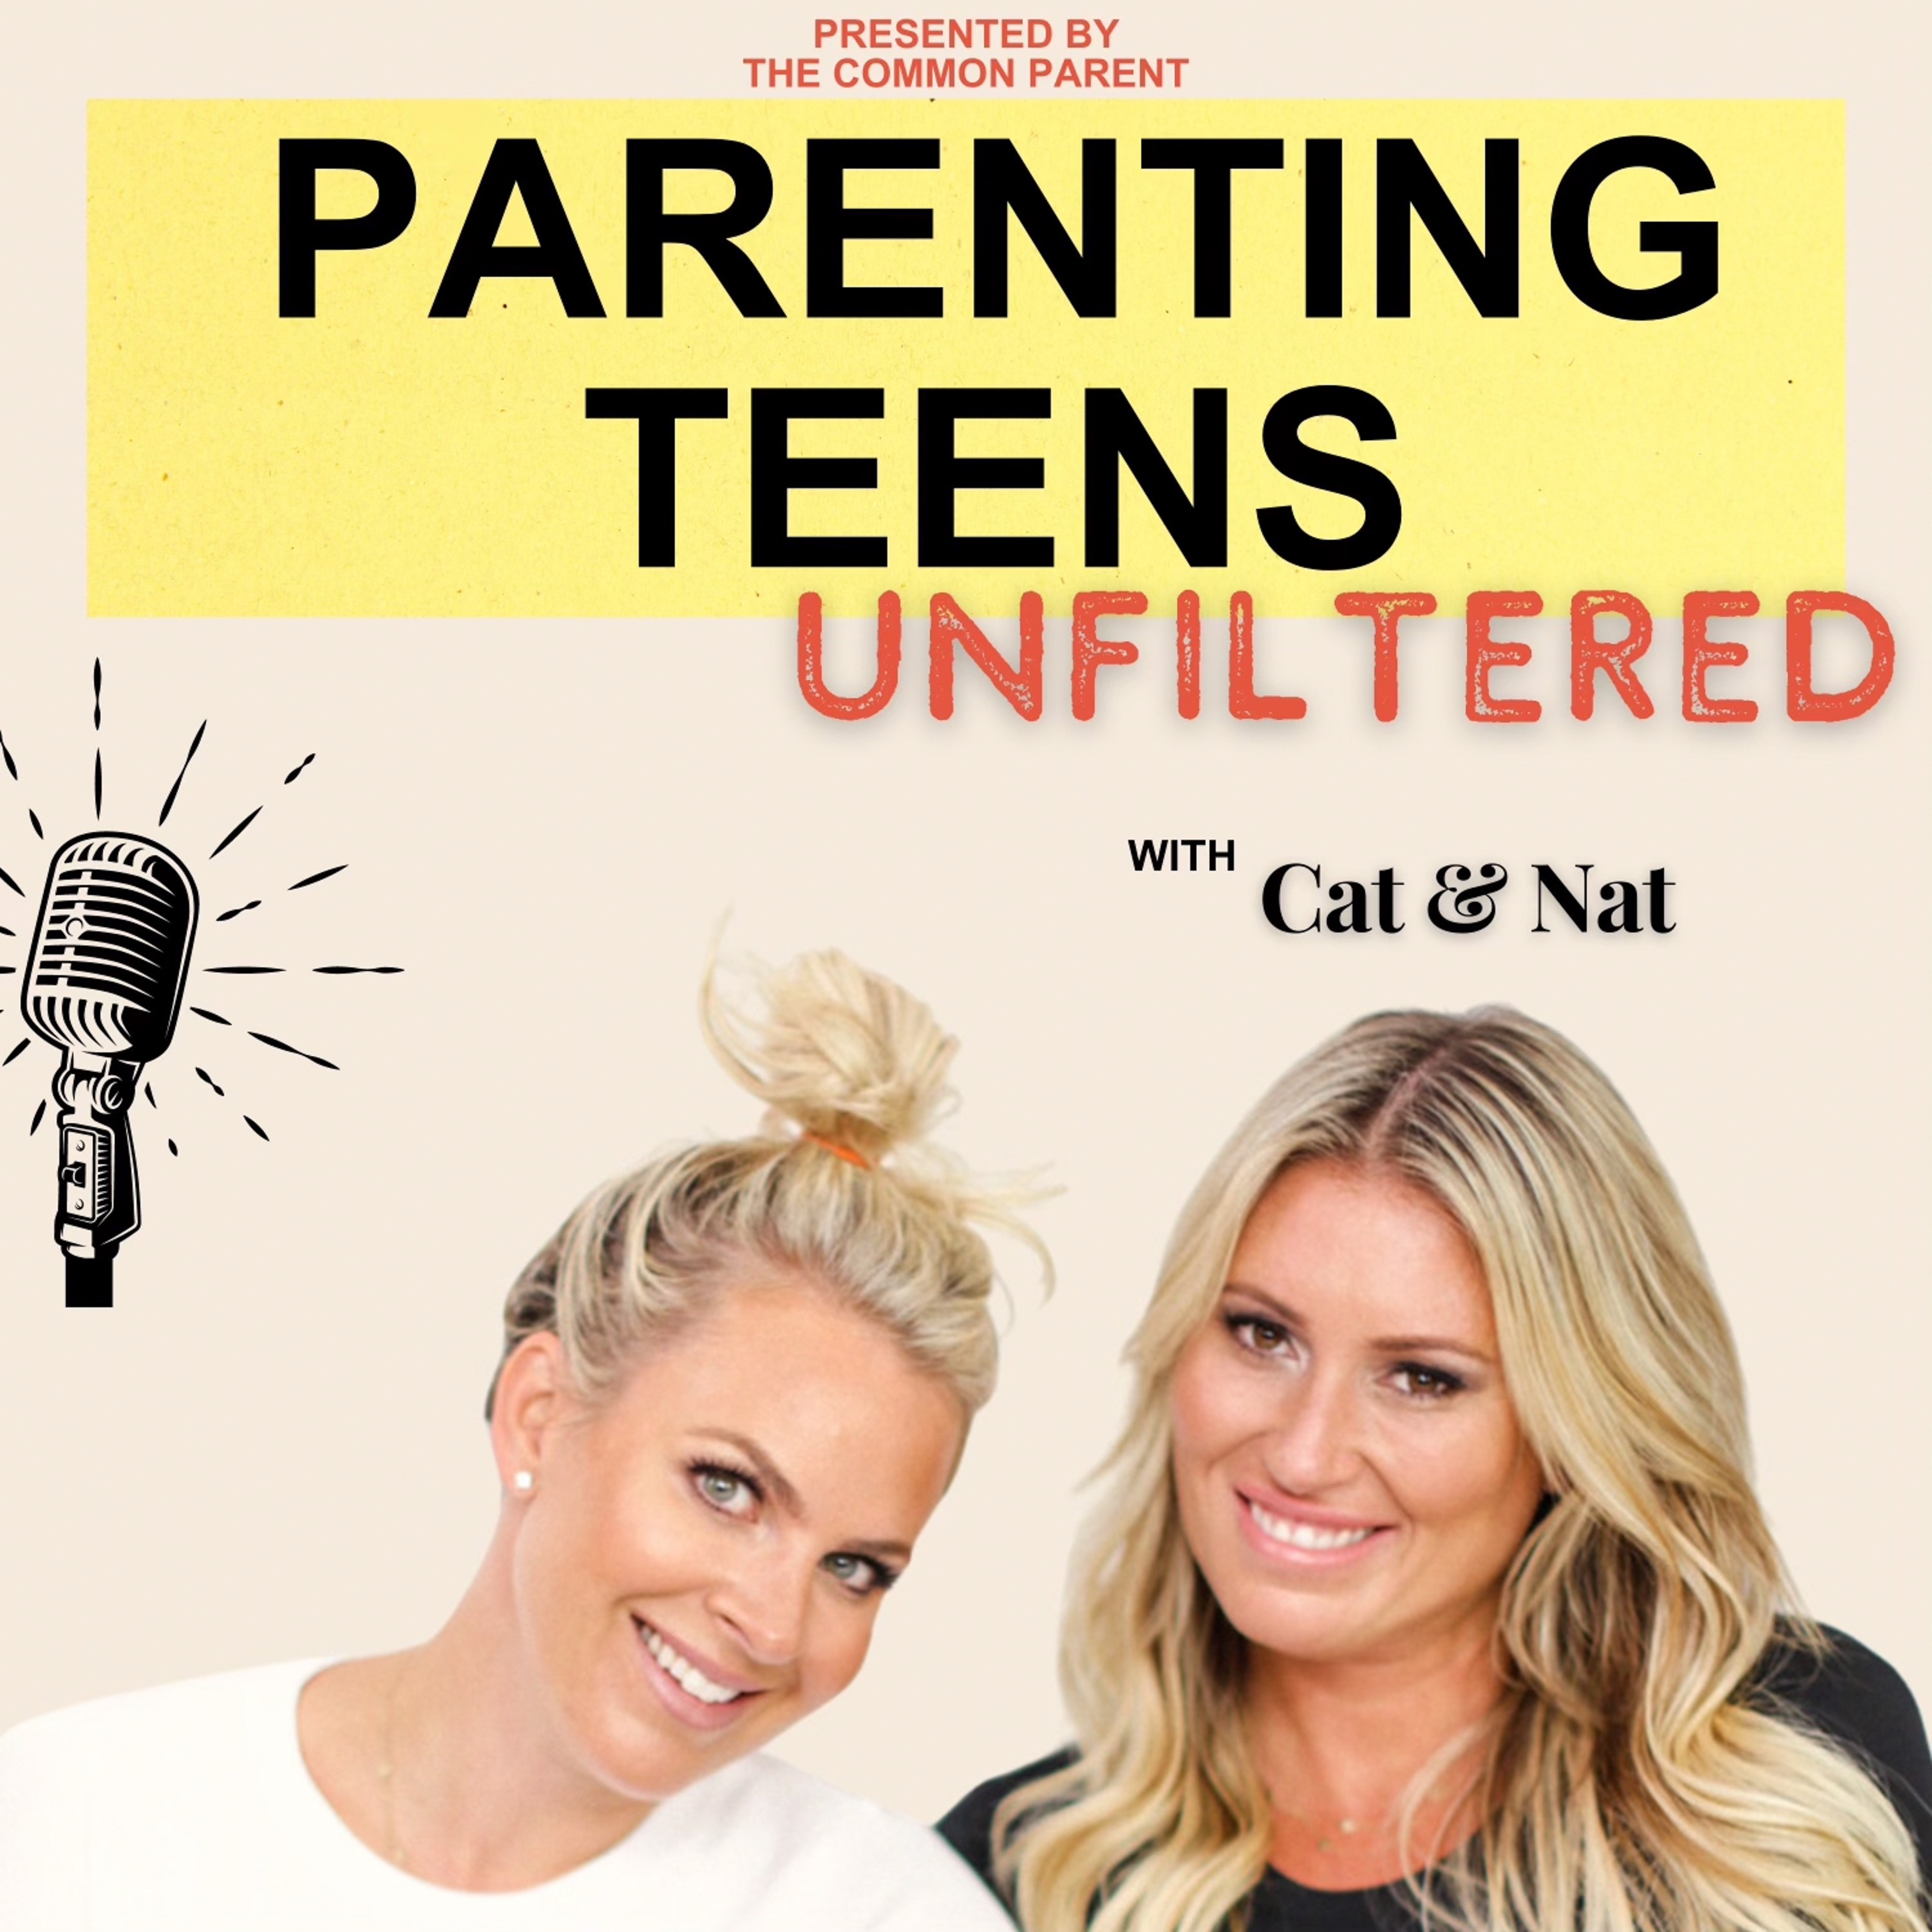 Parenting Teens Unfiltered: Missed School & The Emotional Lives of Teens